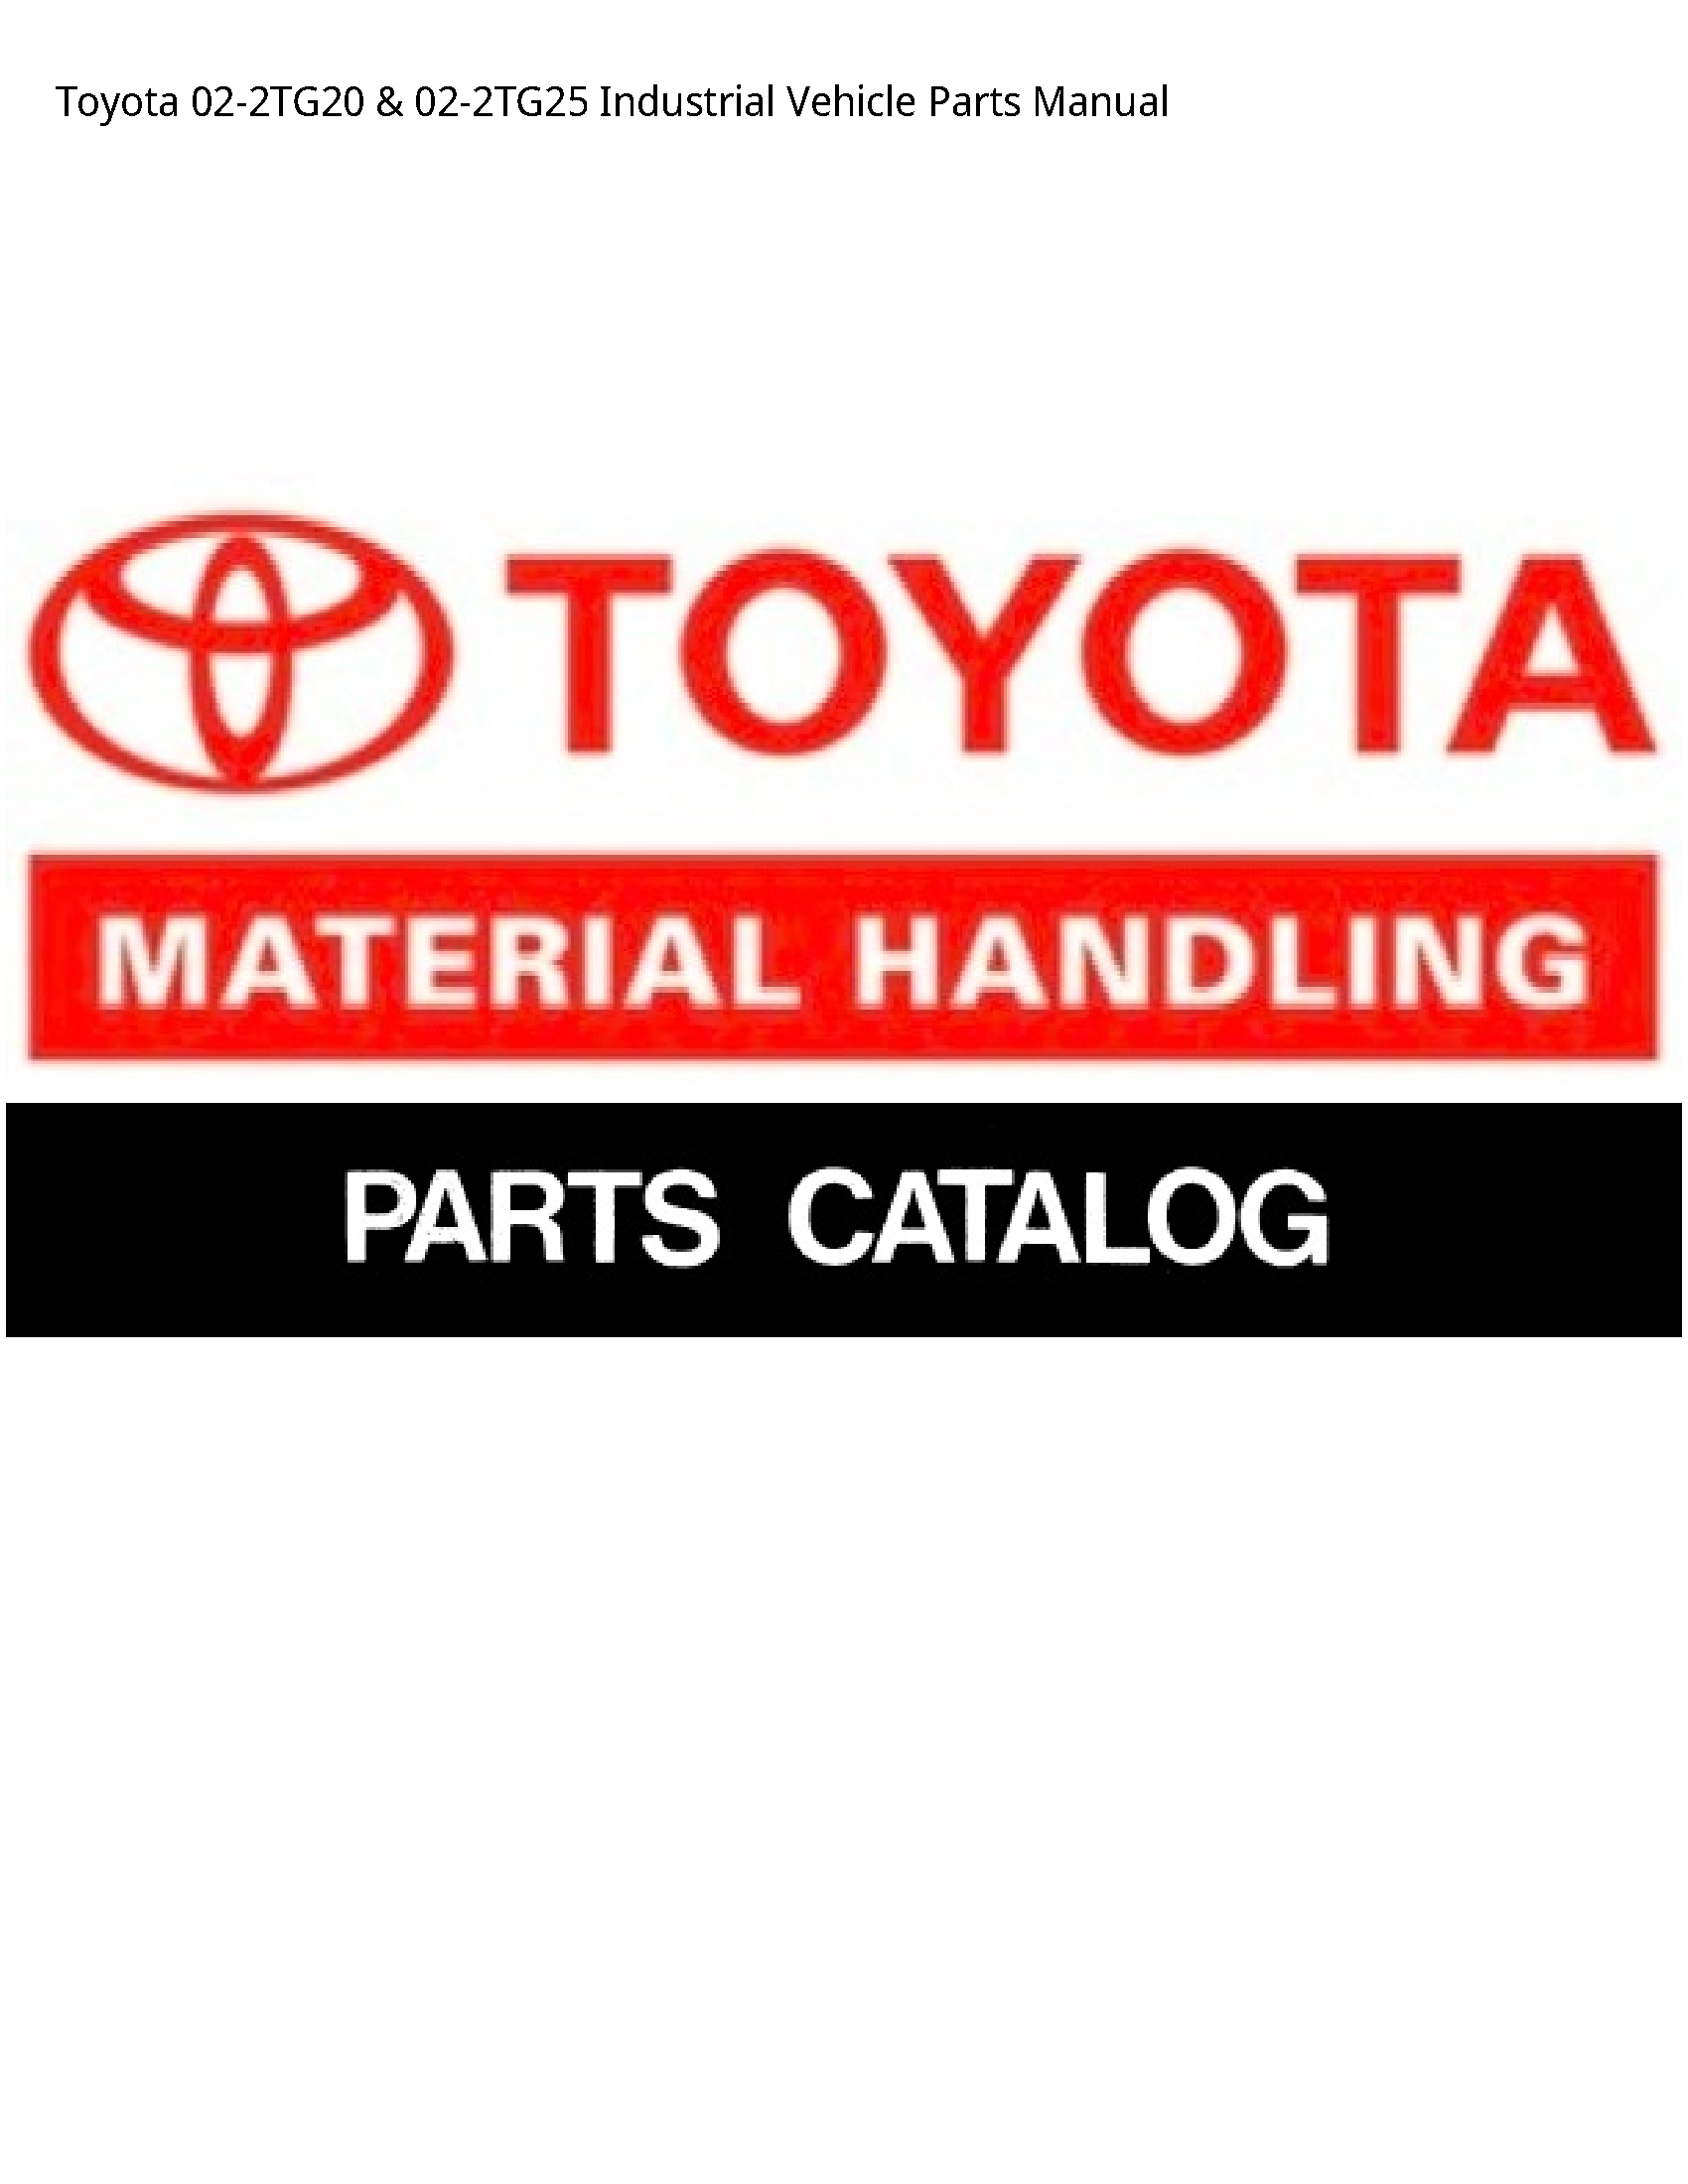 Toyota 02-2TG20 Industrial Vehicle Parts manual